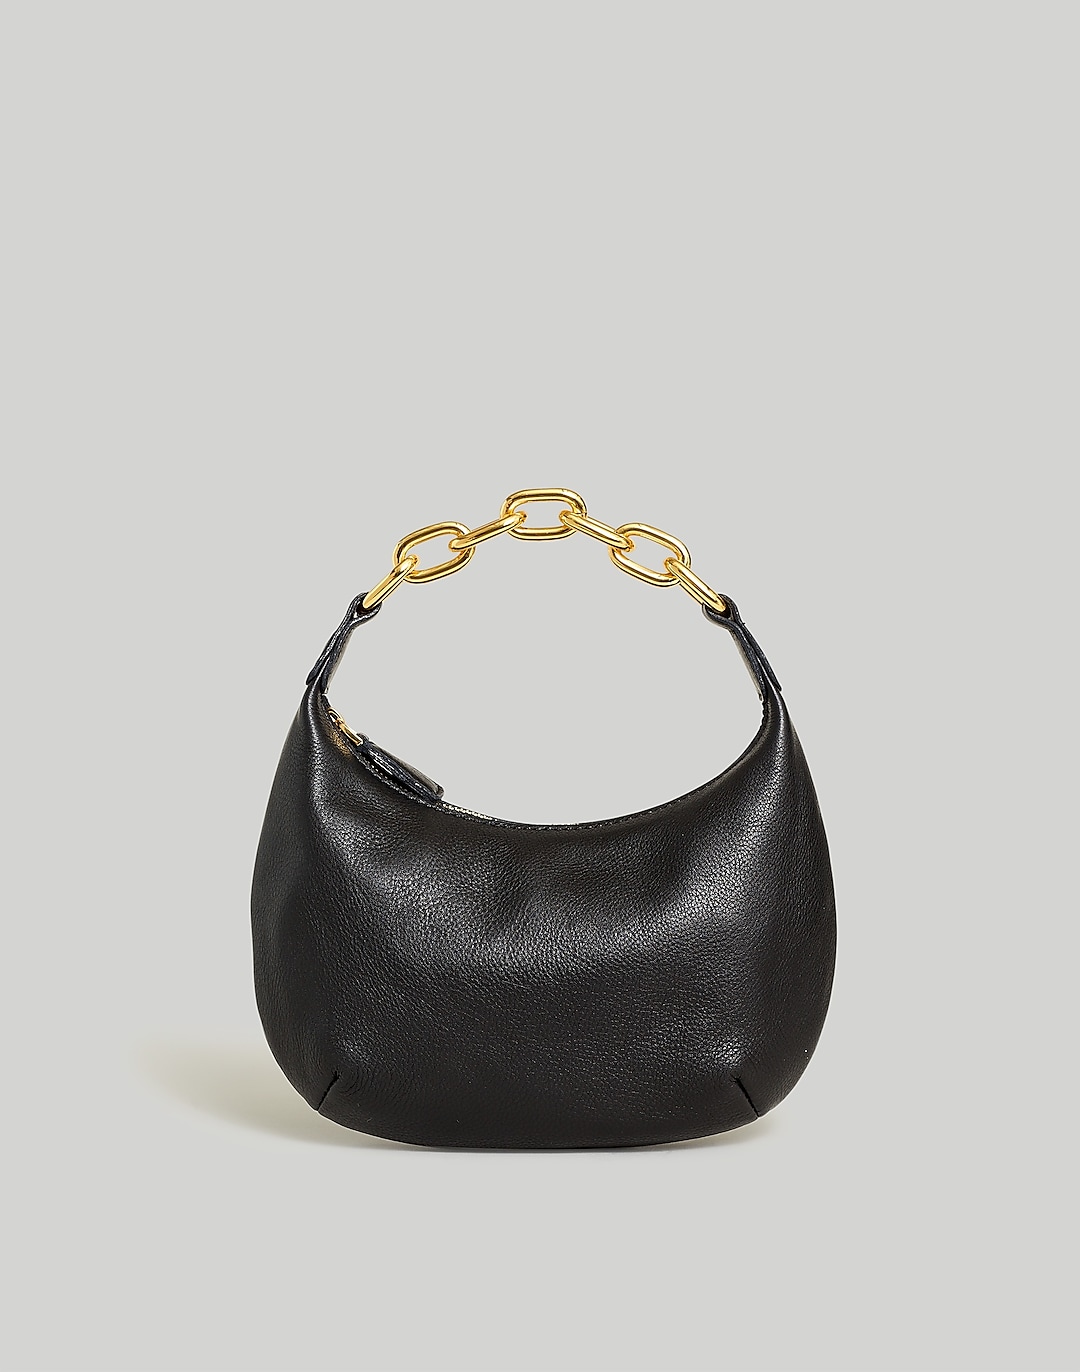 The Chain Mini Bag in Leather | Madewell